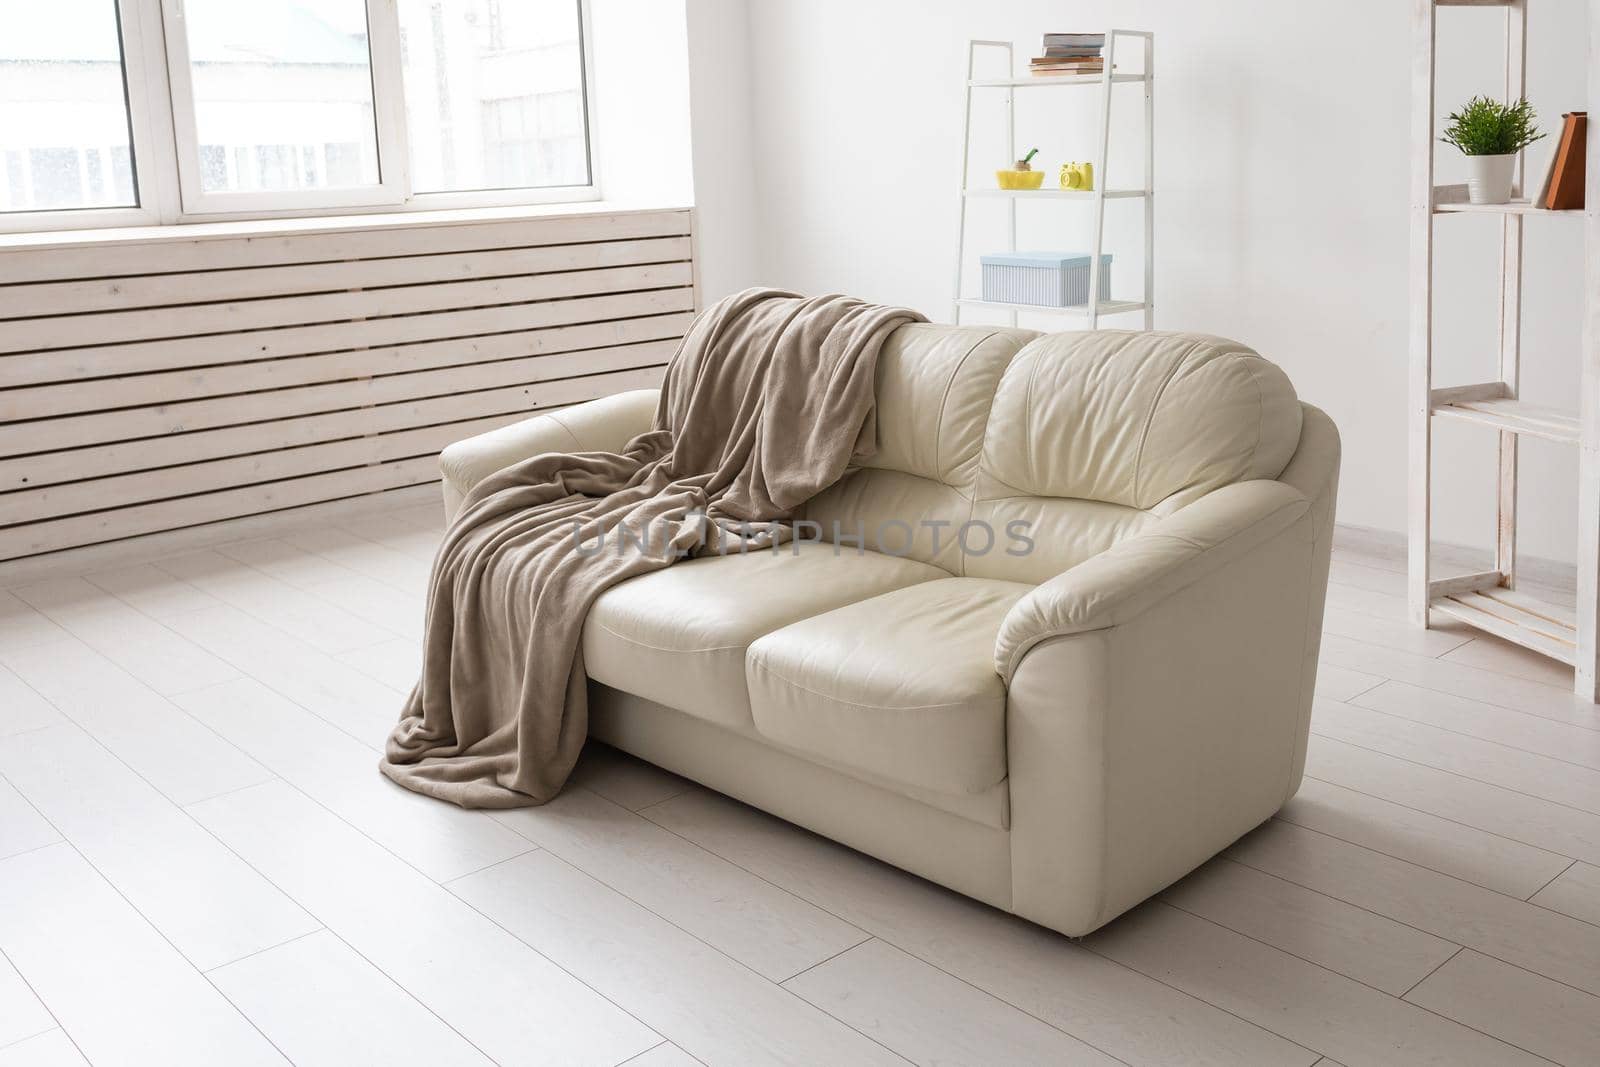 Beige sofa against white empty wall in simple living room interior. Minimalism concept. by Satura86